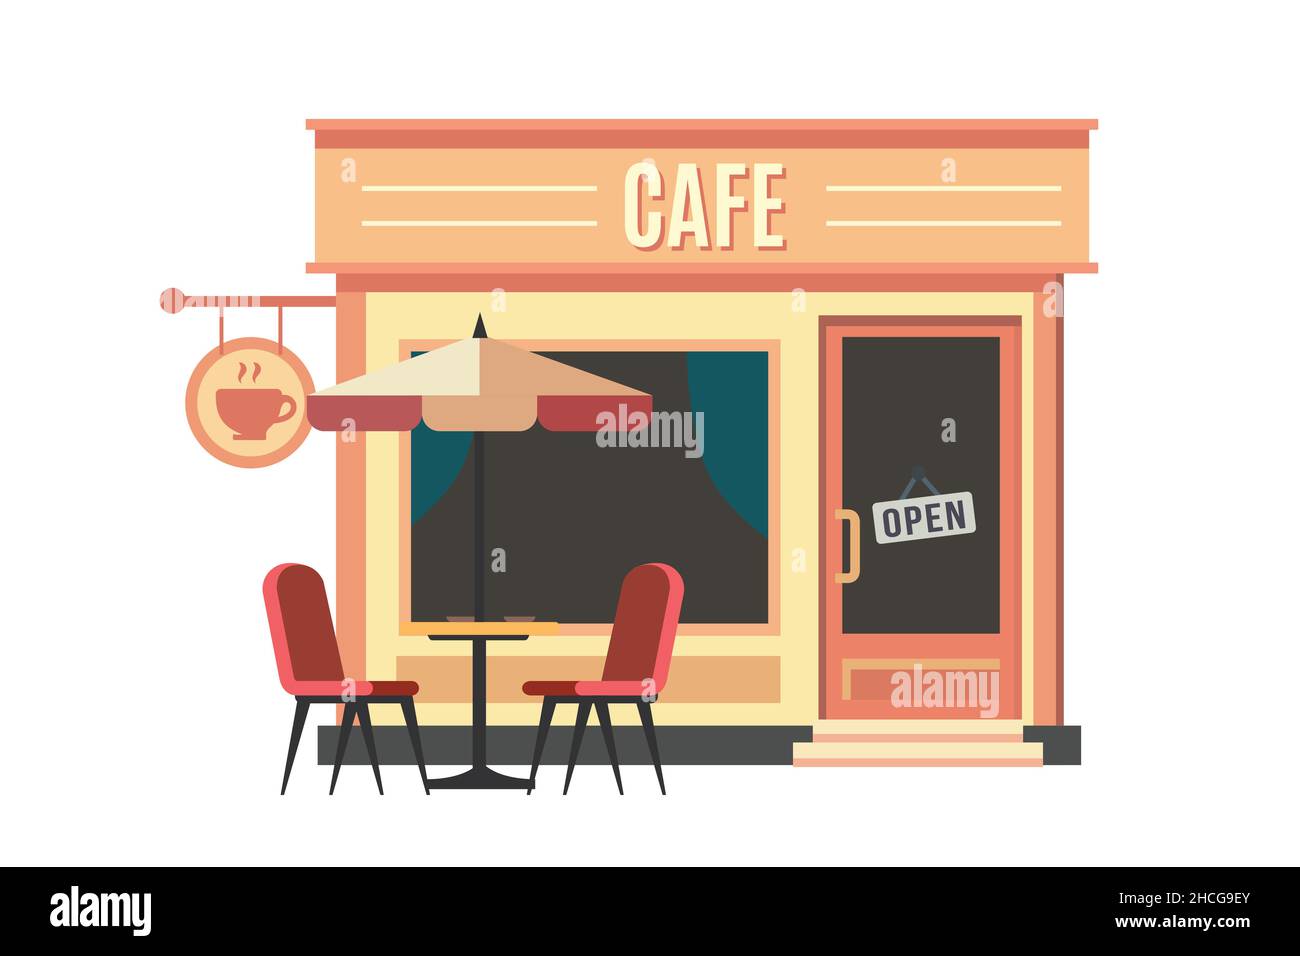 Cafe building with open sign and outdoor sitting with umbrella. Simple Architectural asset Stock Vector